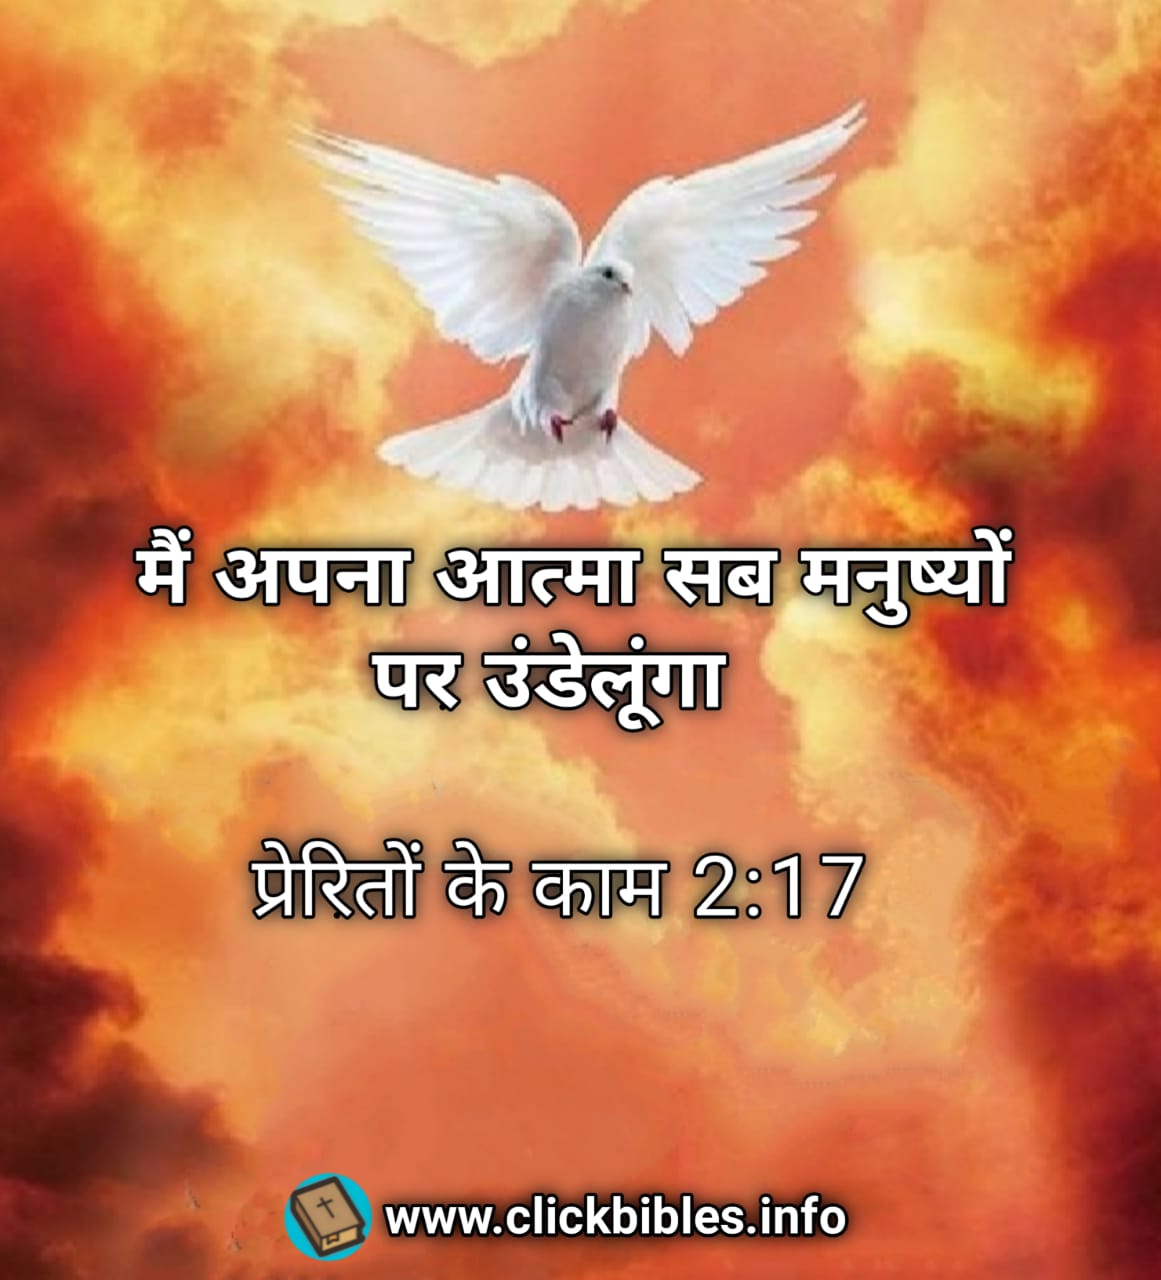 Astonishing Collection of Full 4K Images: Top 999+ Hindi Bible Verses